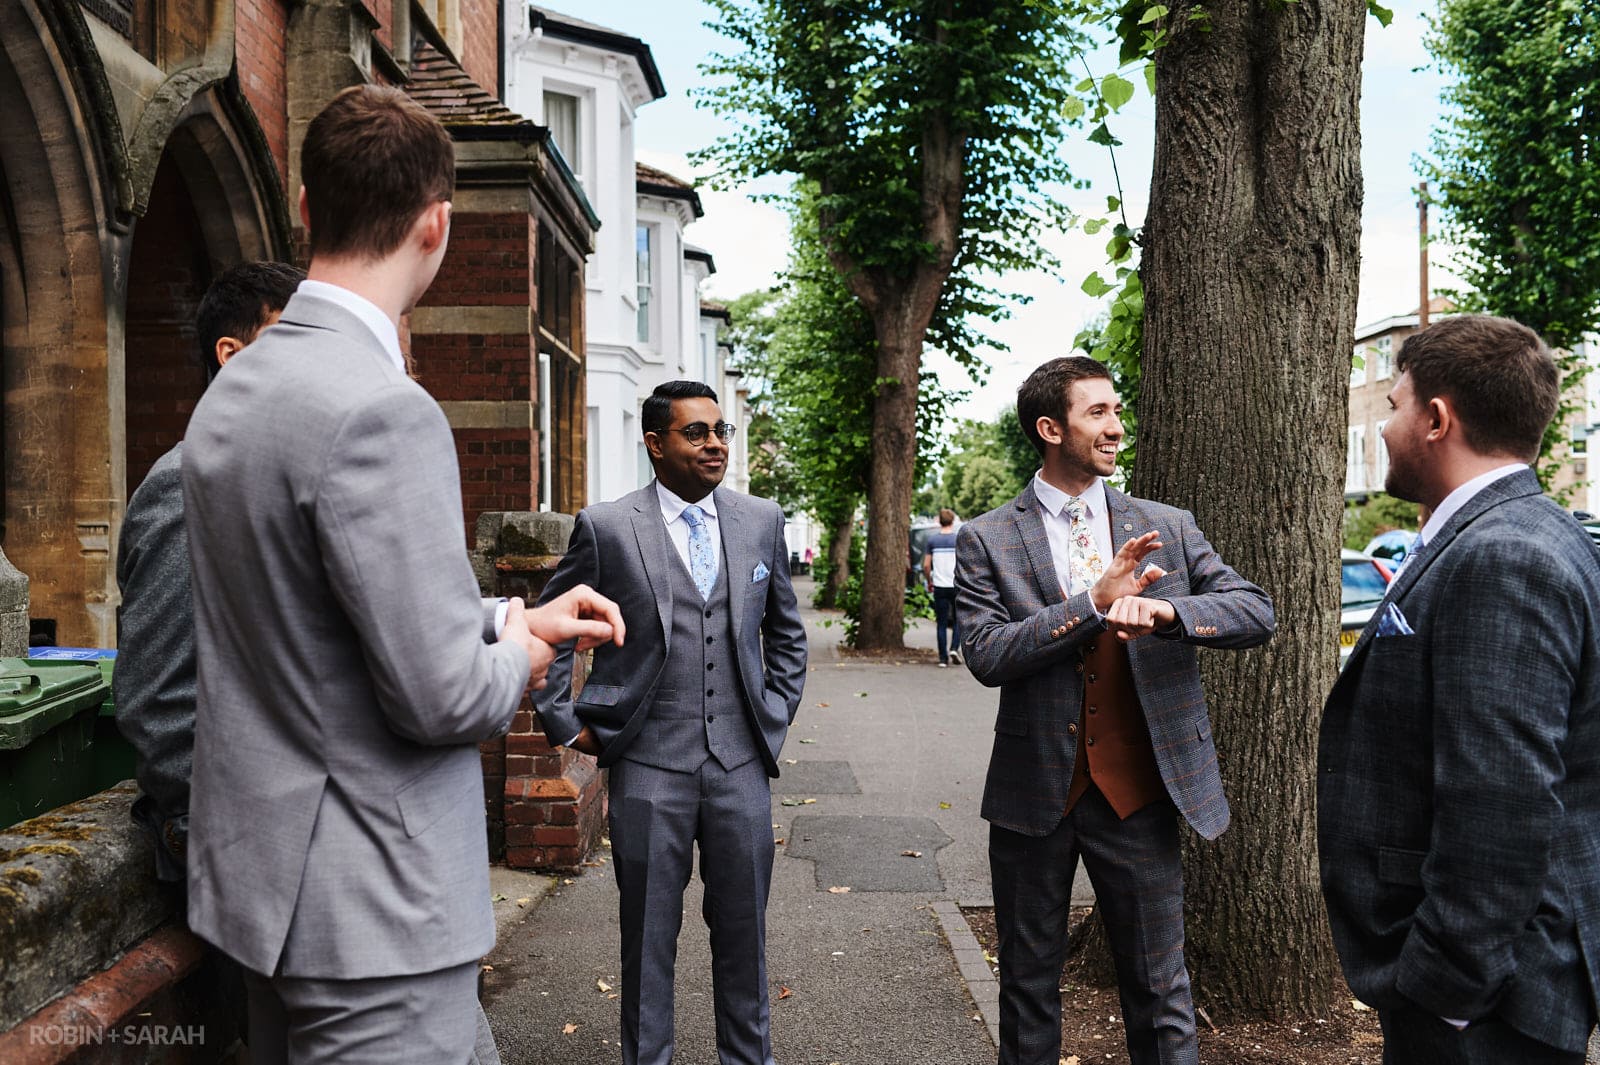 Groom and friends outside church waiting for wedding guests to arrive